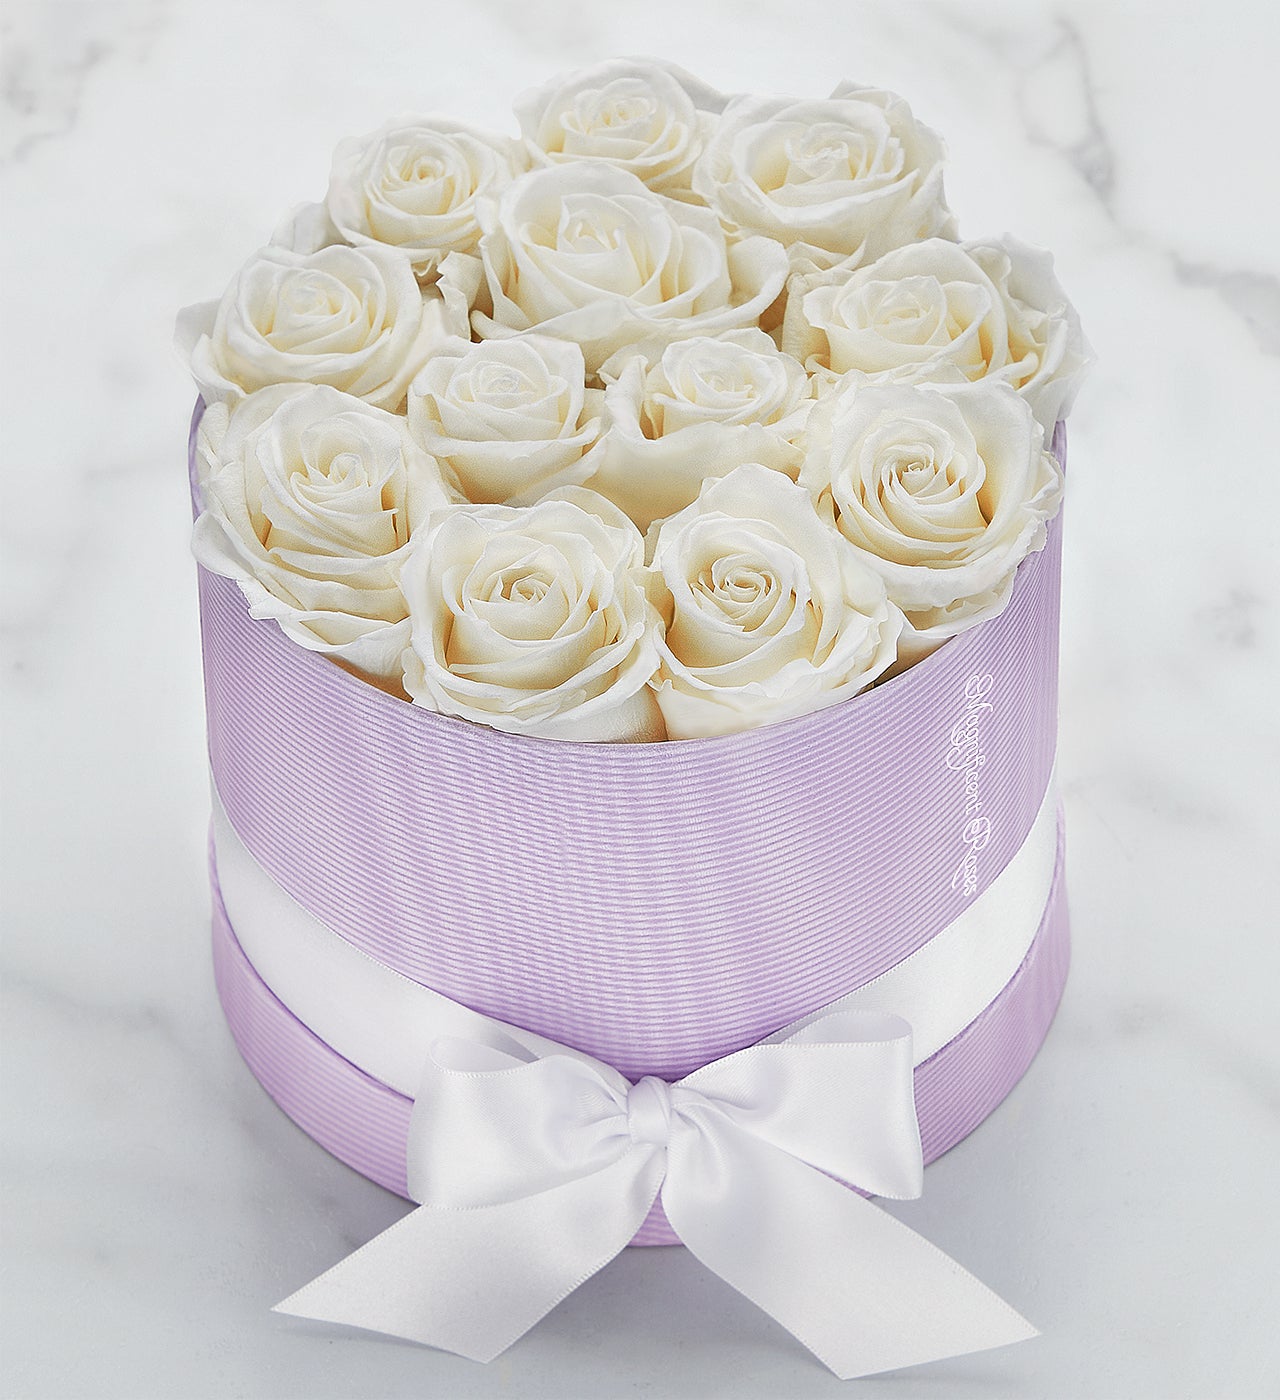 Magnificent Roses® Preserved White Roses 